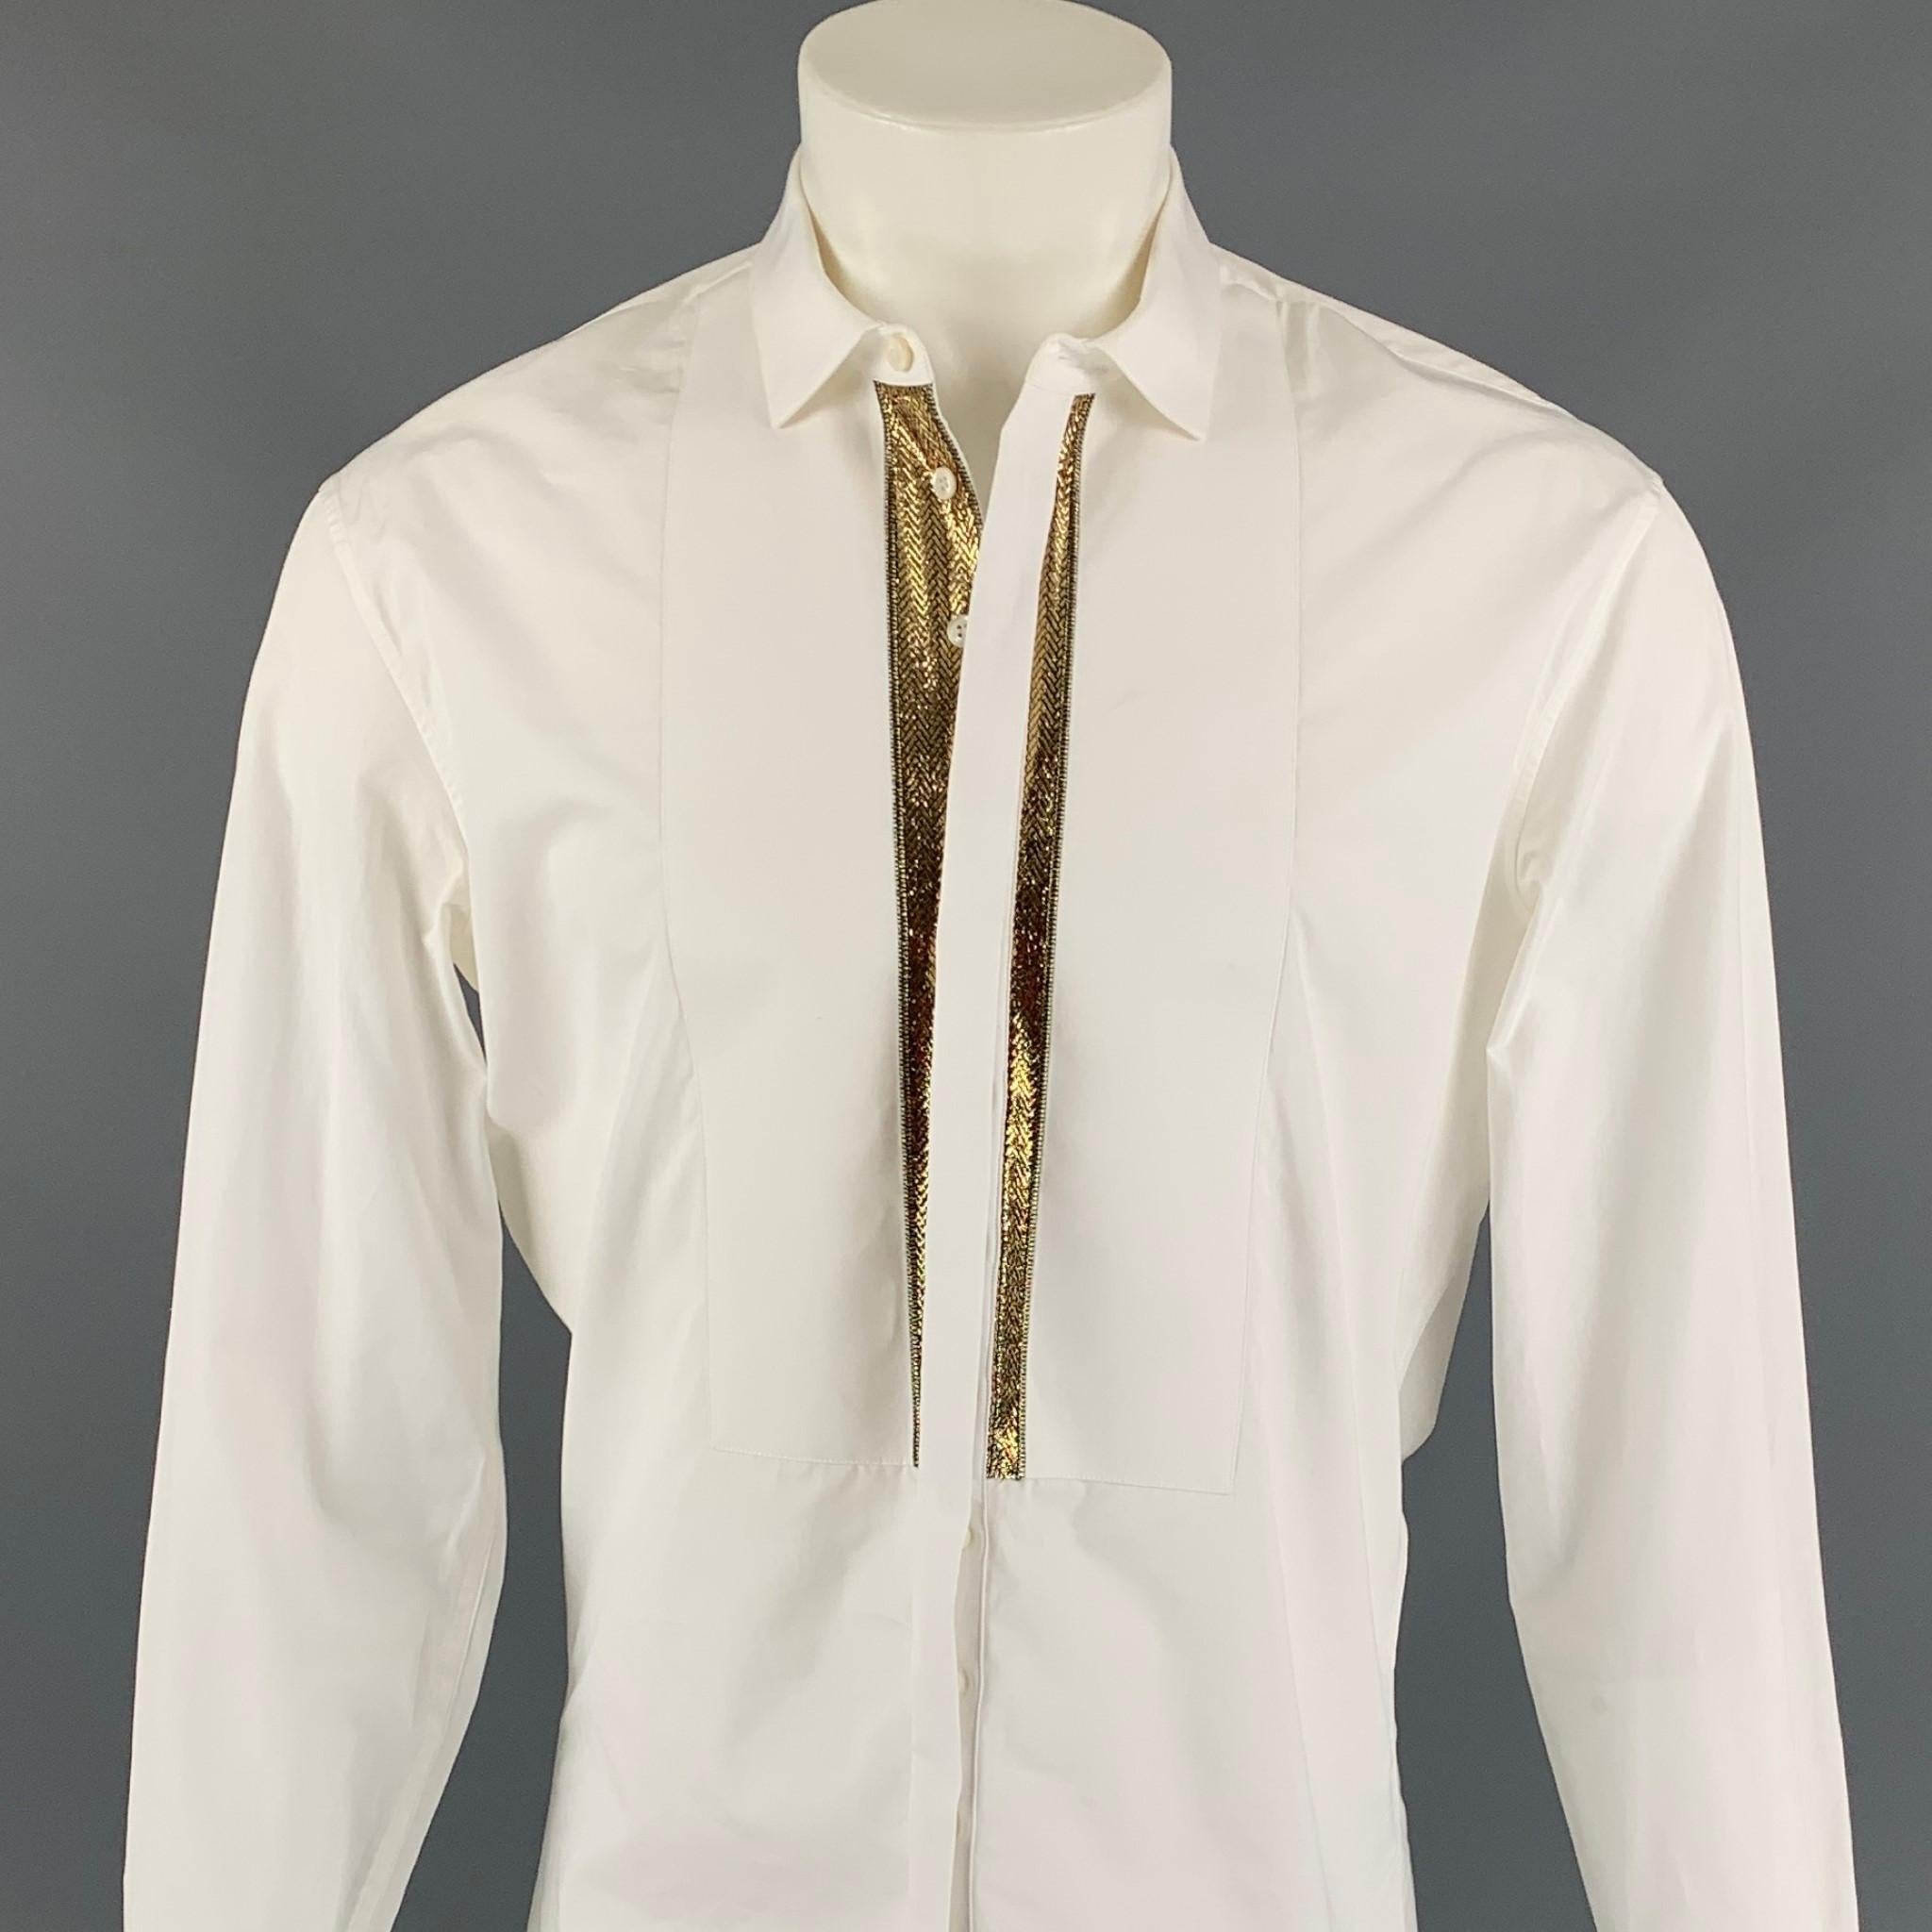 DSQUARED2 long sleeve shirt comes in a white cotton with a gold trim featuring a spread collar and a hidden button closure. Made in Italy. 

Good Pre-Owned Condition. Discoloration at lower sleeve.
Marked: 48

Measurements:

Shoulder: 19 in.
Chest: